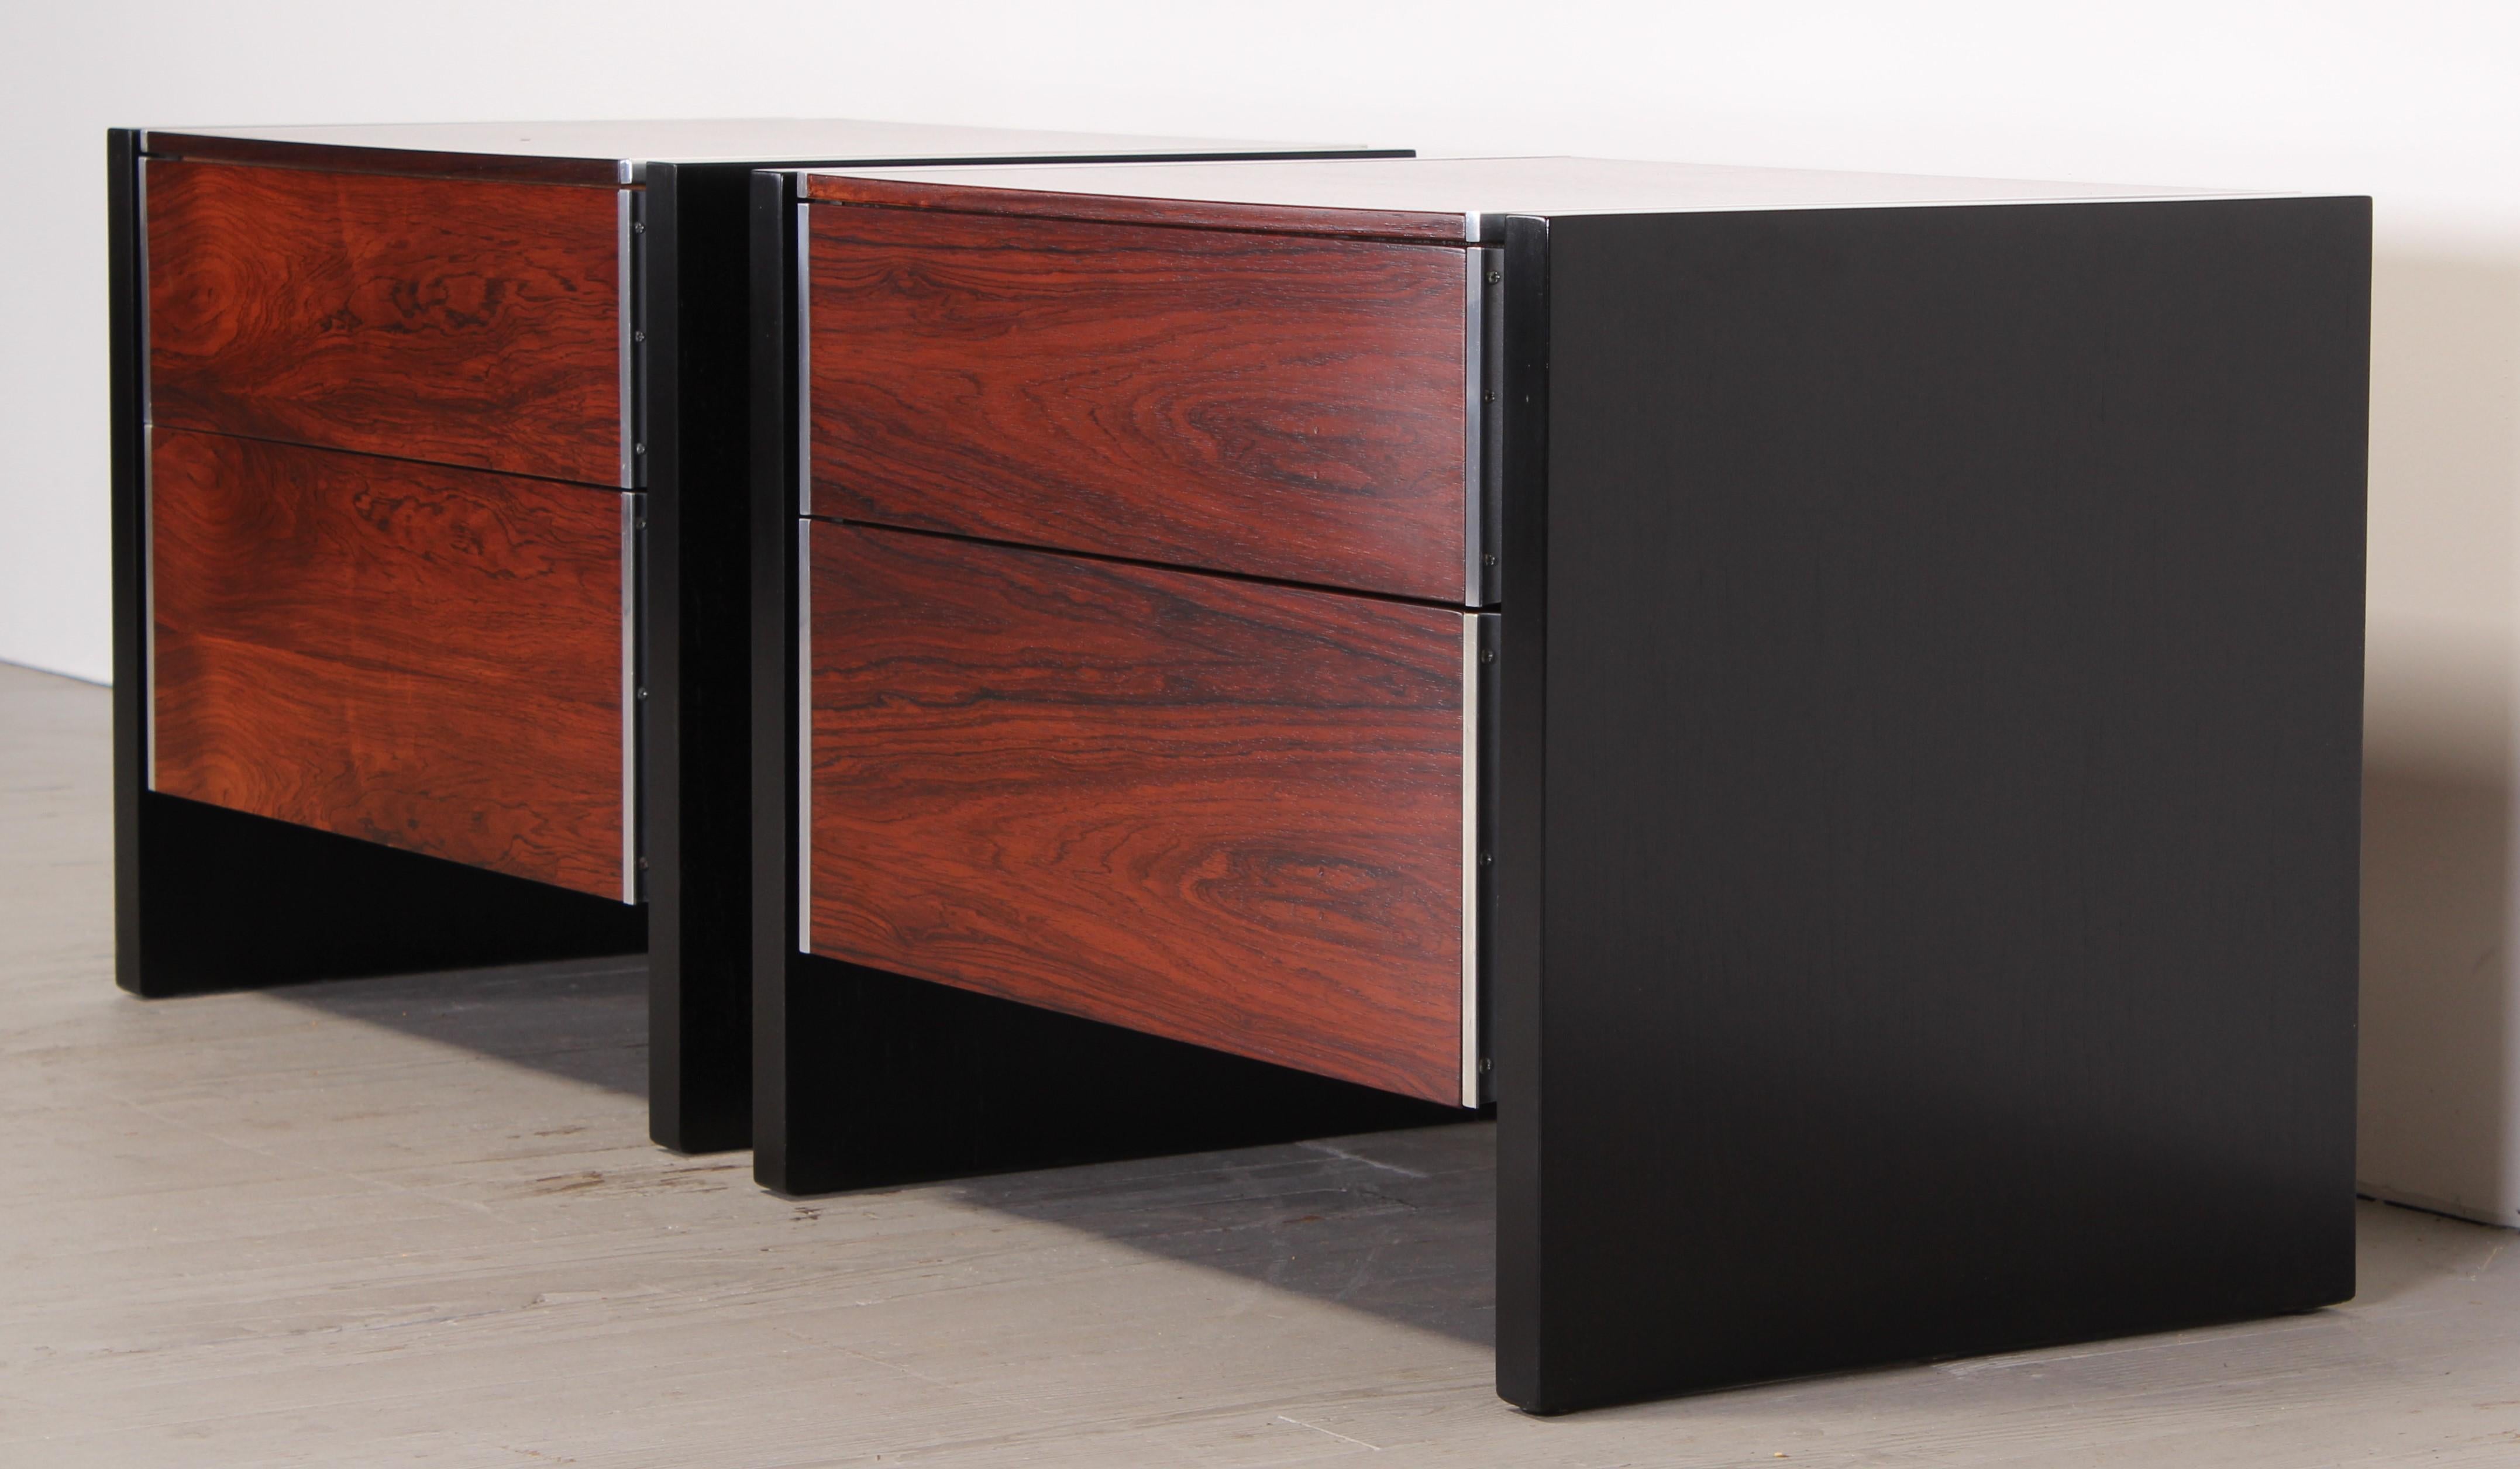 An exquisite pair of Robert Baron for Glenn of California rosewood bedside tables or nightstands, 1970. Black oak side panels alternating with rosewood tops and drawer fronts, with aluminum accent pieces and hidden drawer pulls. Beautifully restored